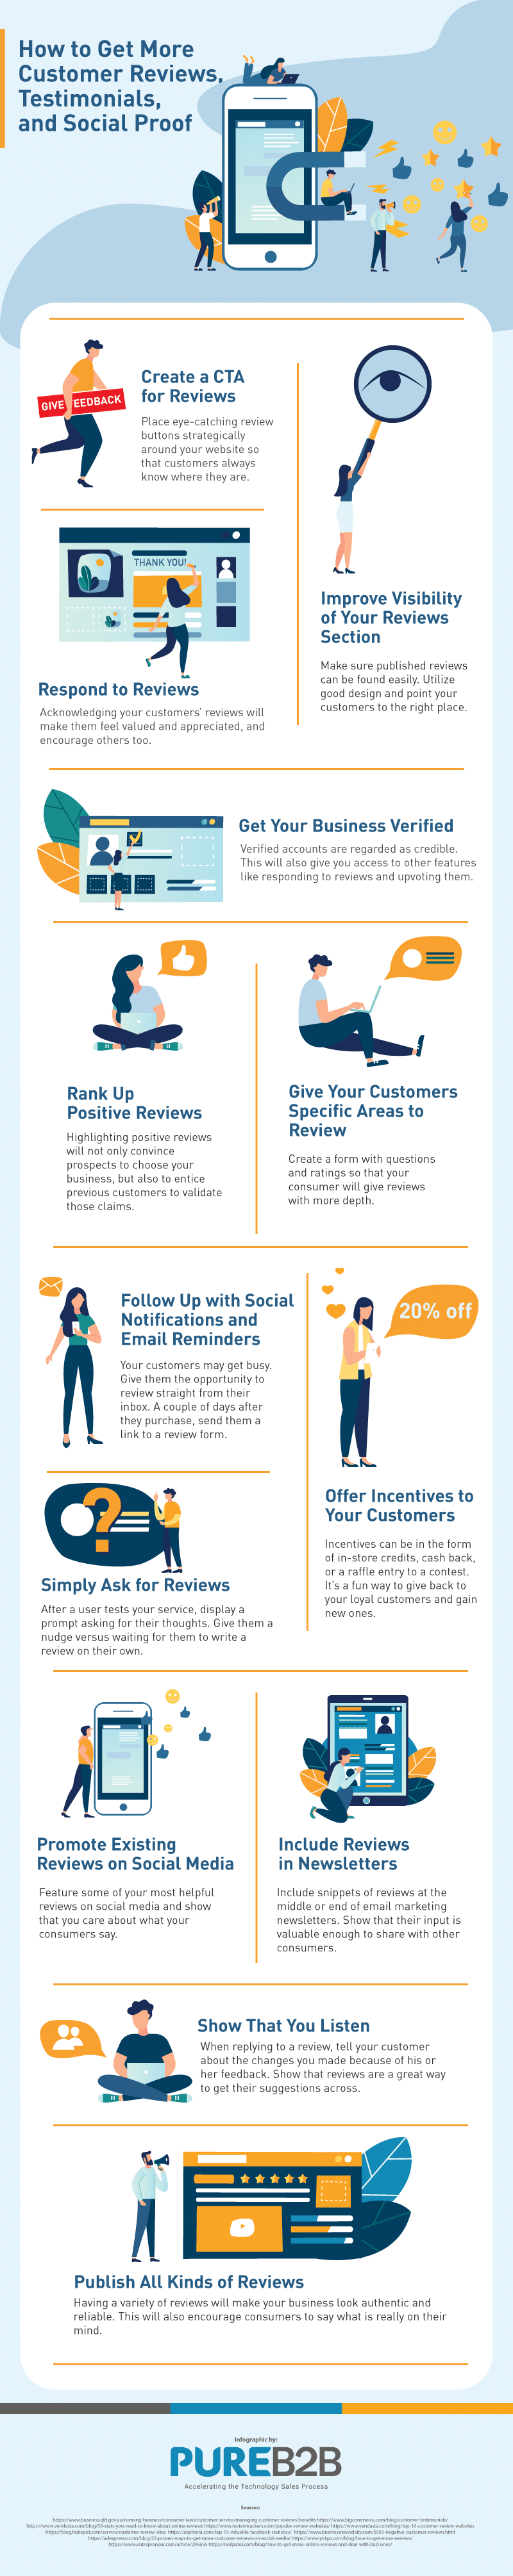 Infographic-How to Get More Customer Reviews Testimonials and Social Proof